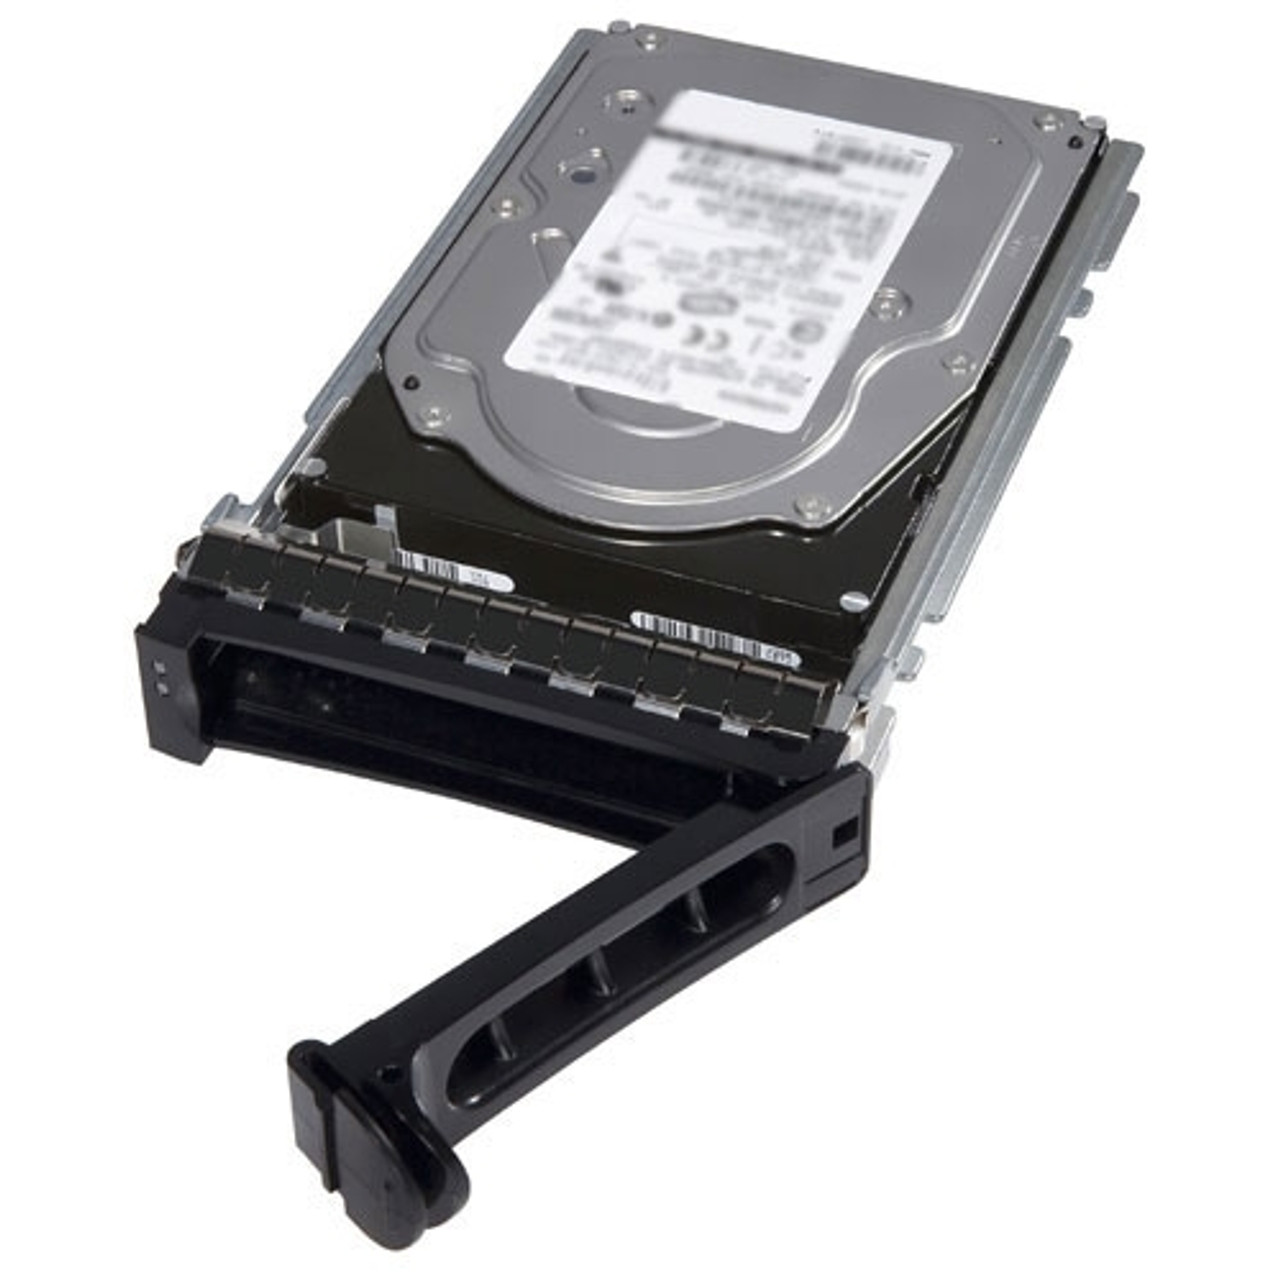 DELL 46PHH 900gb 10000rpm 64mb Buffer Sas-6gbps 2.5inch Hard Drive With Tray For Poweredge And Powervault Server